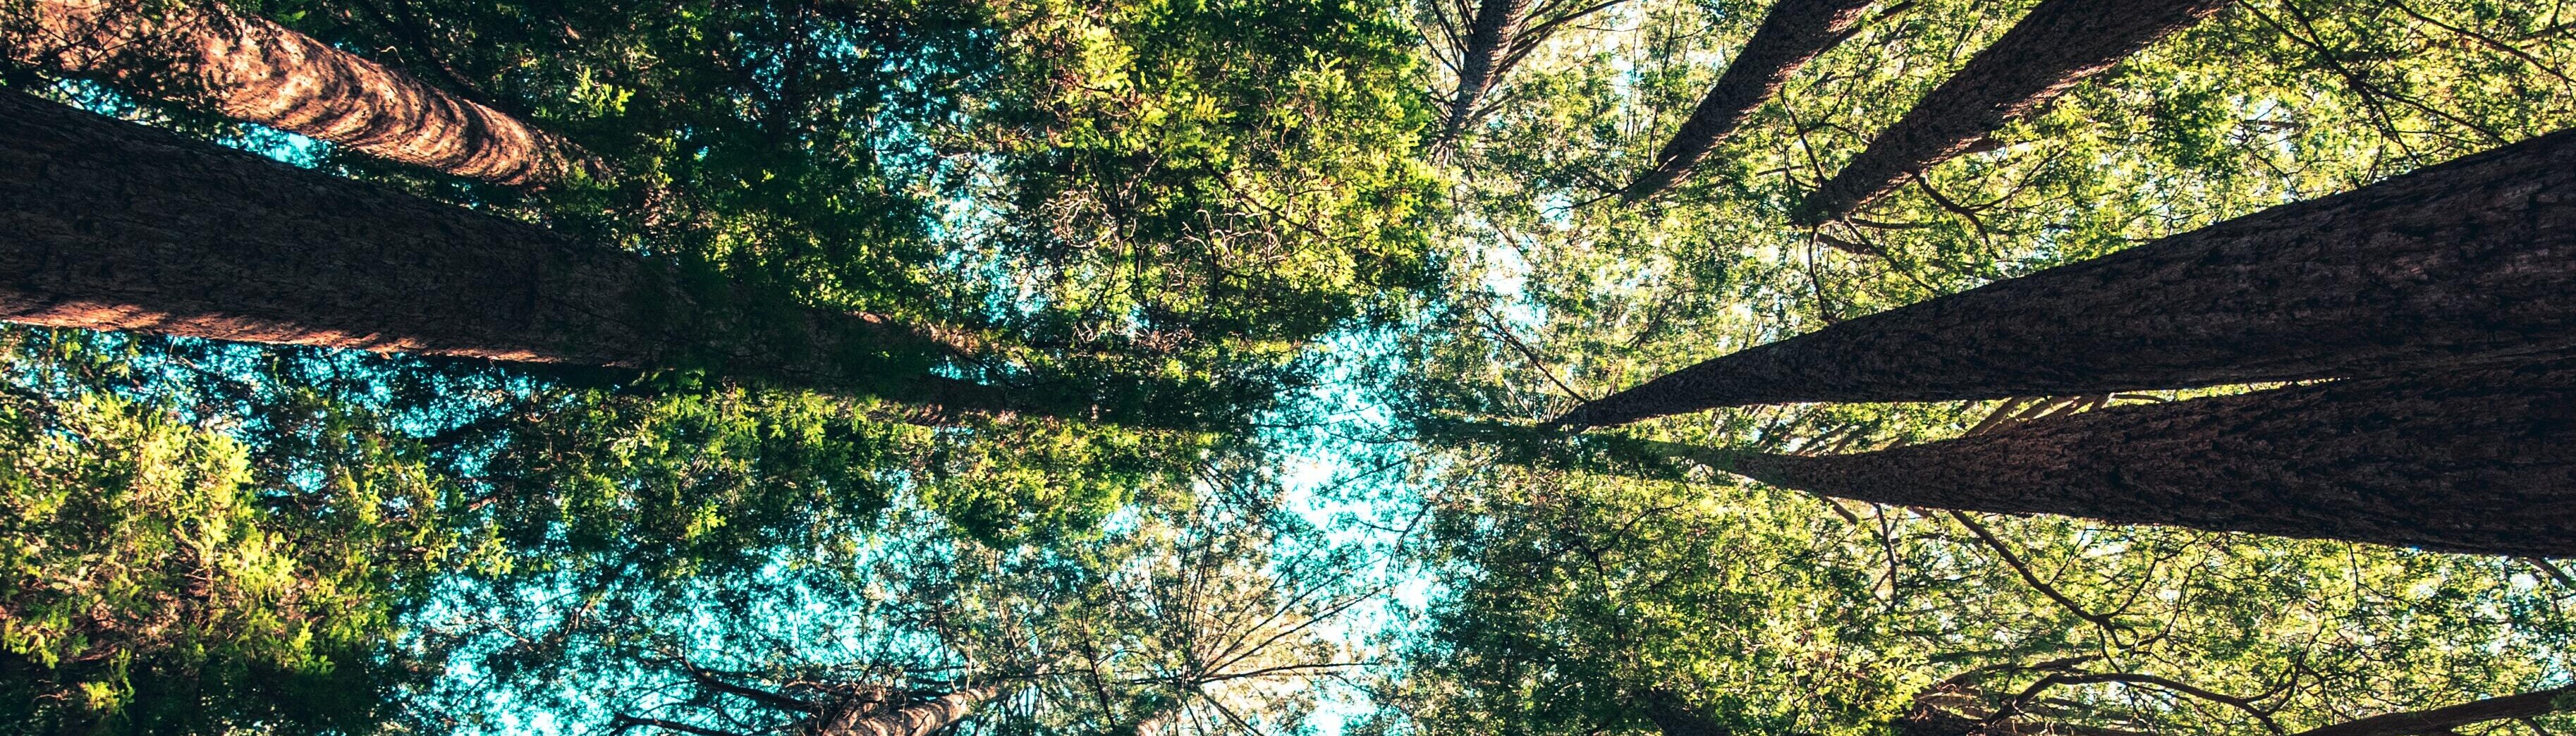 looking up through the trees